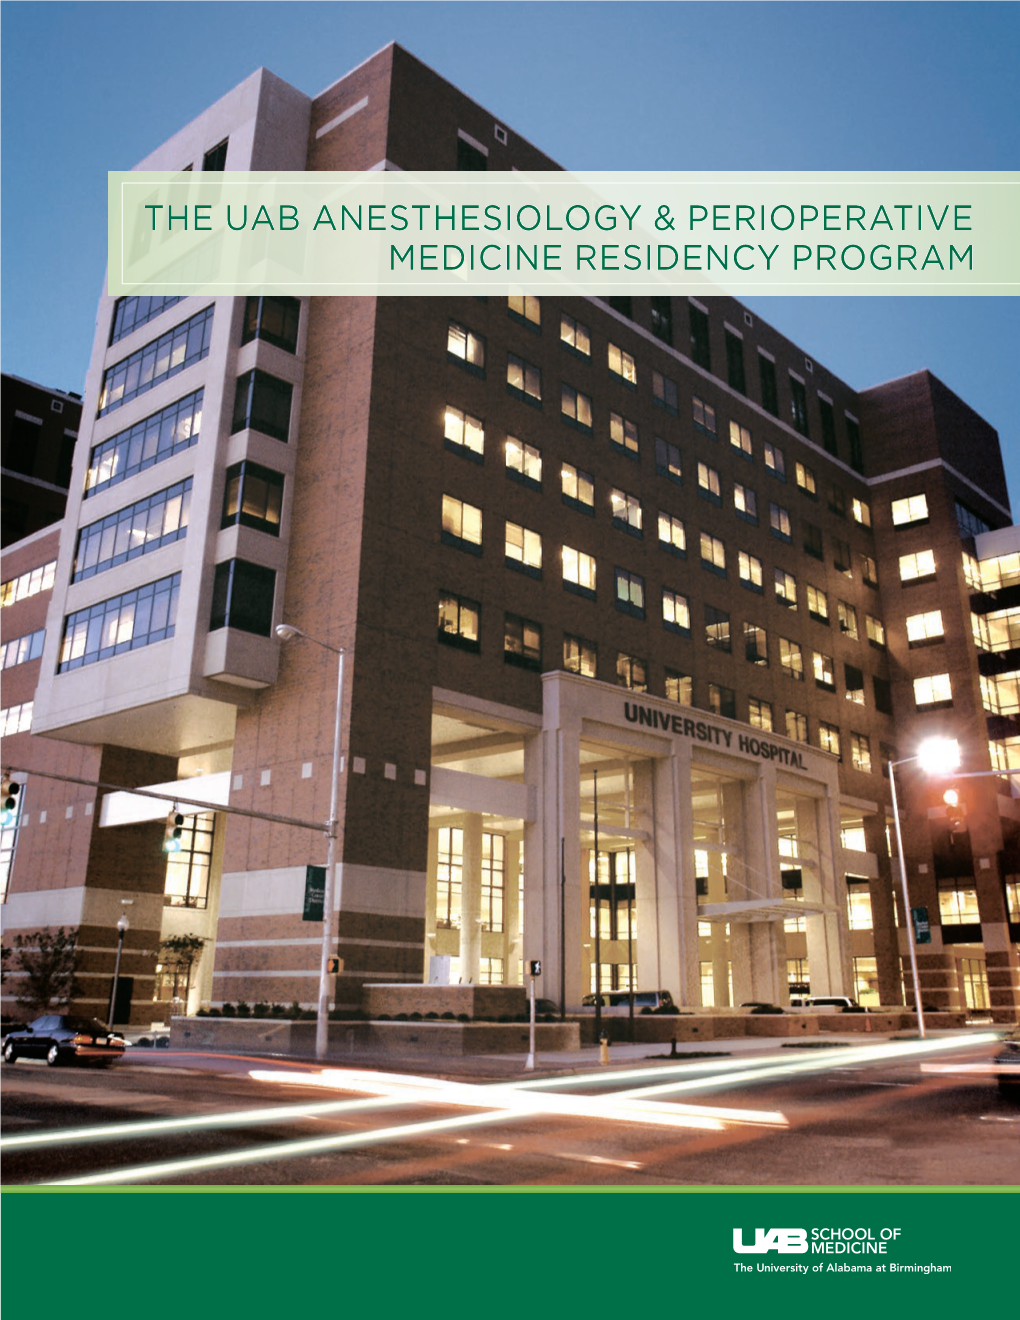 The Uab Anesthesiology & Perioperative Medicine Residency